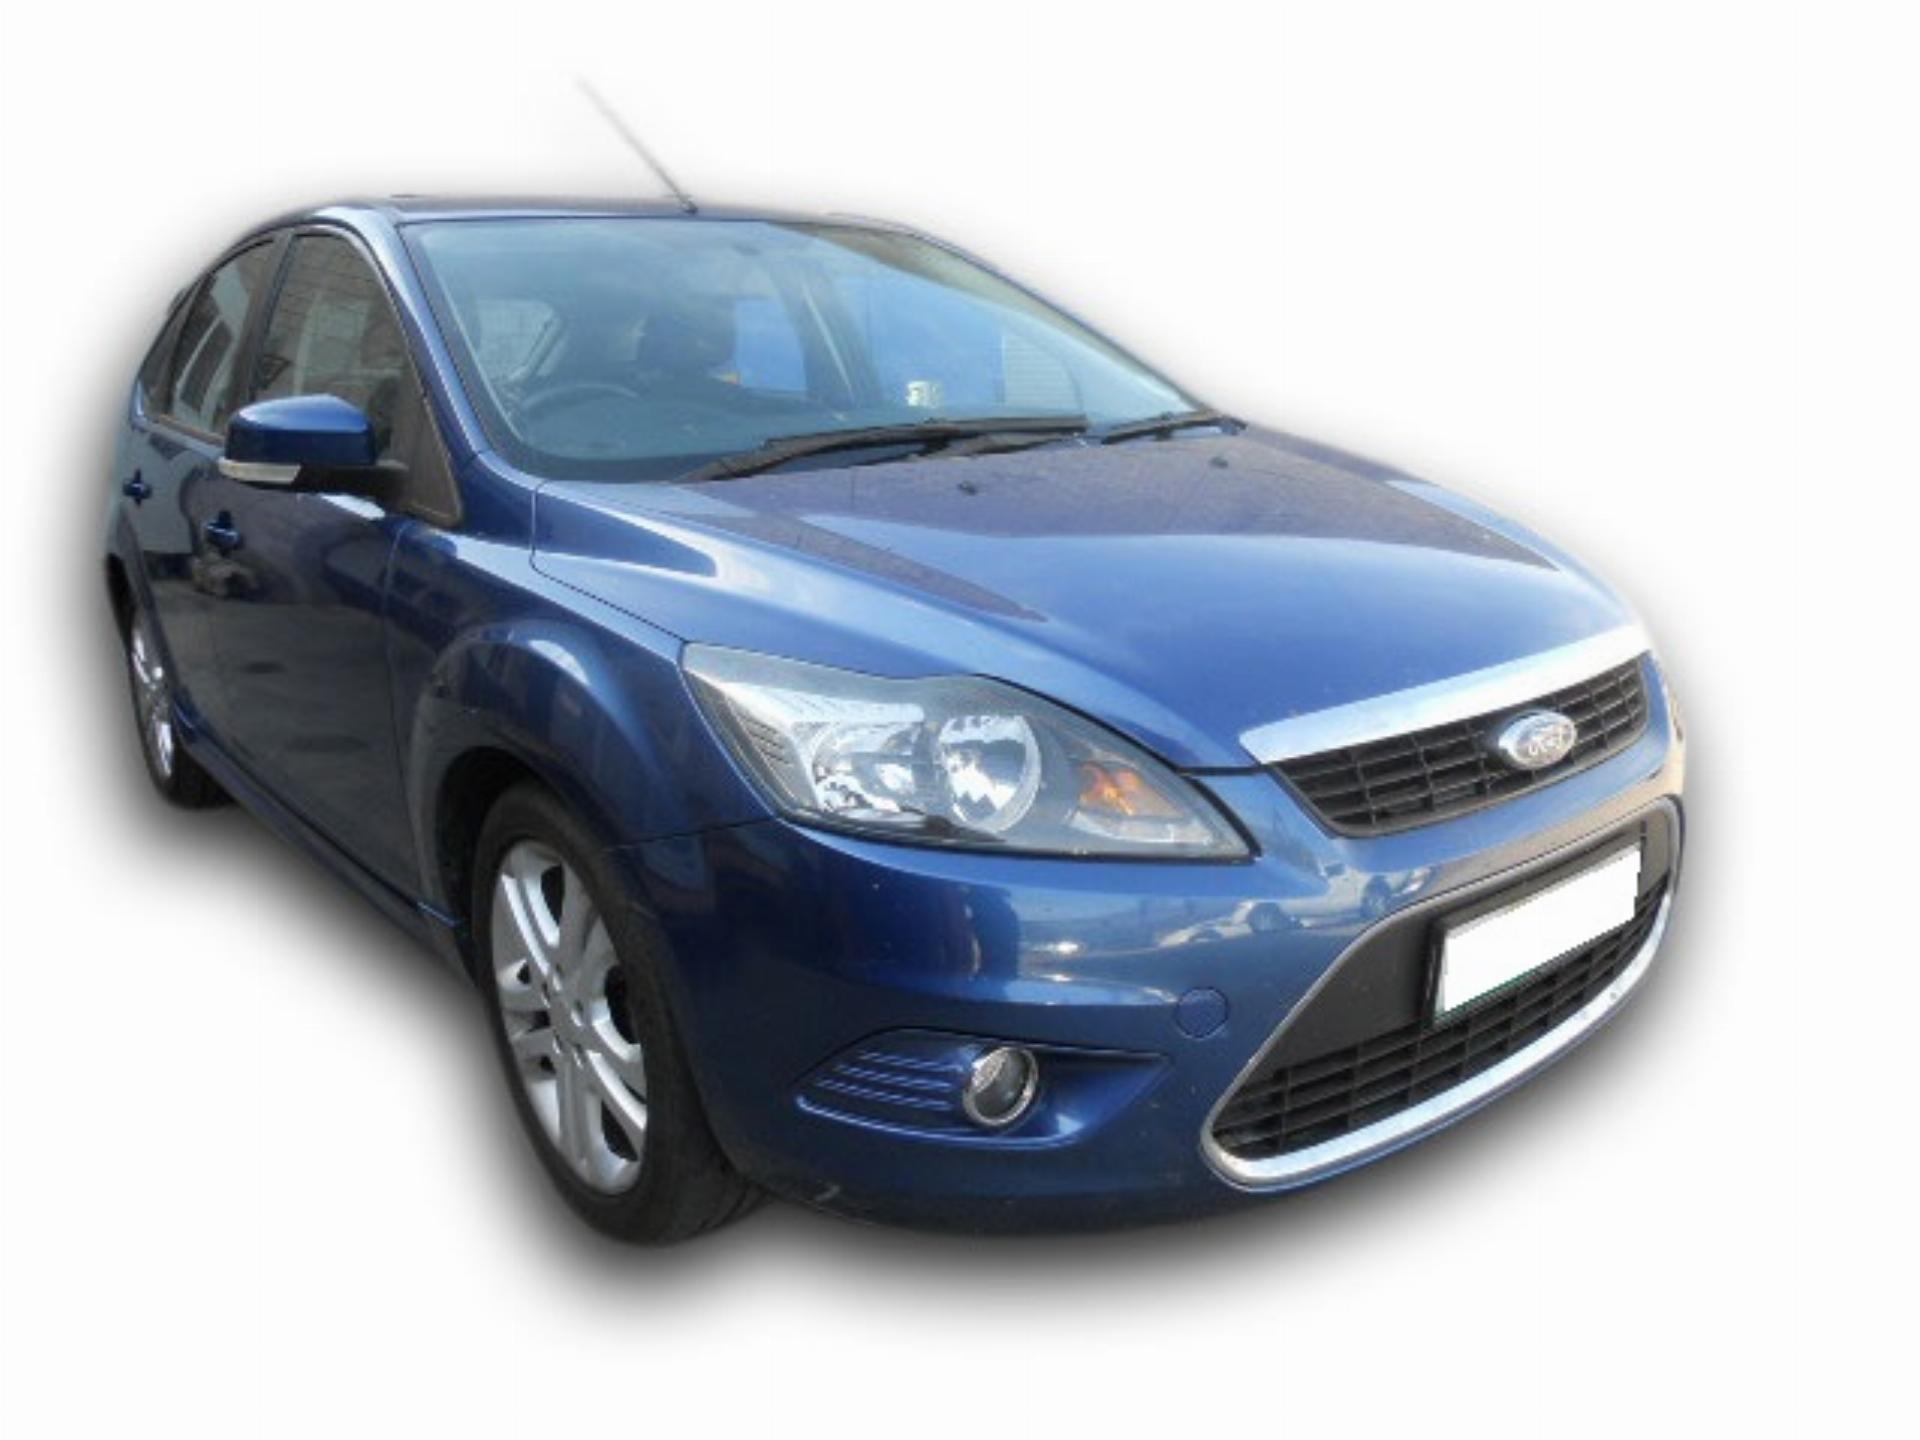 Ford Focus 1.8S 5DR